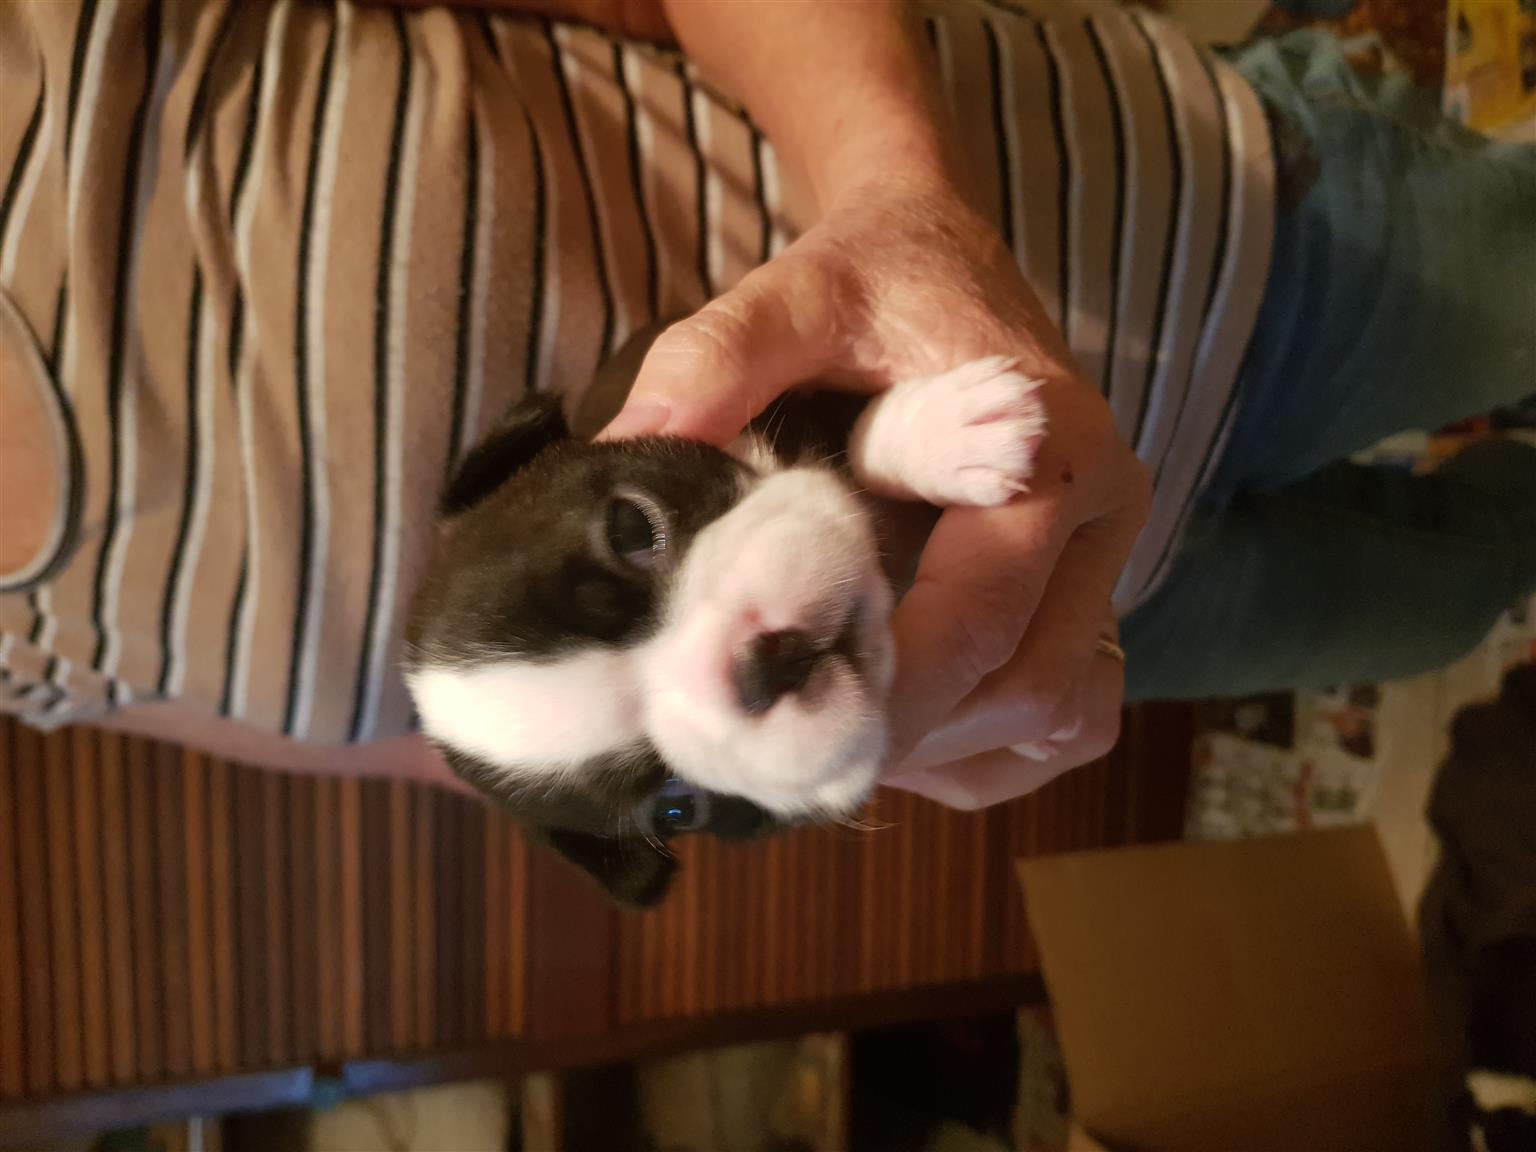 Purebreed boston terriers for sale .. vaccinate and dewormed.